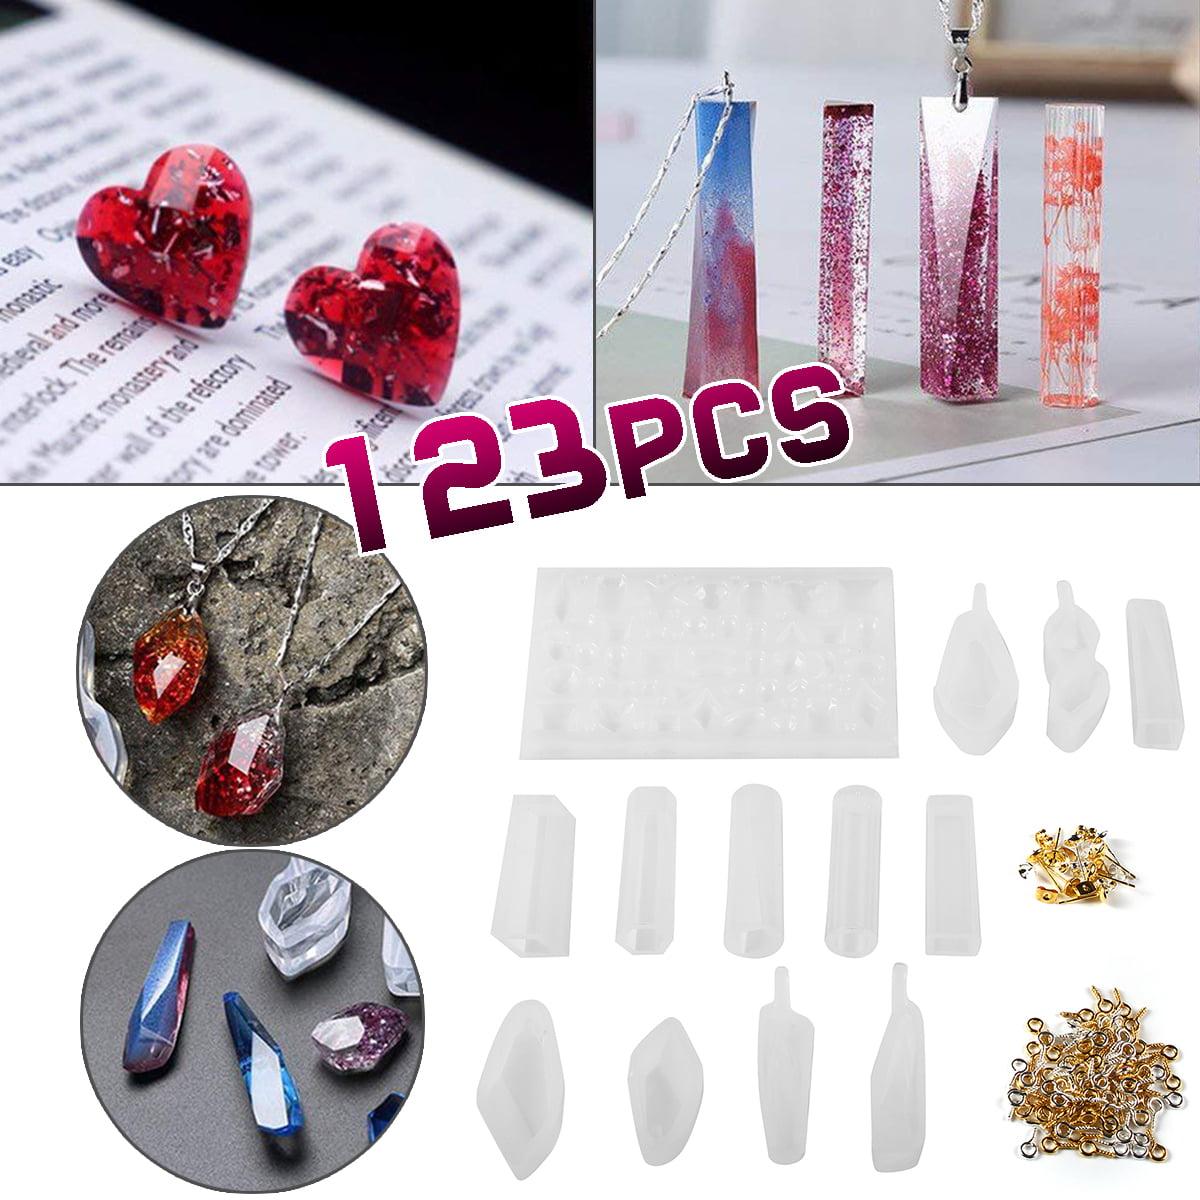 Resin Casting Molds 143 Pcs Mold Tools Kit,3 Silicone Constellation Paperweight Making Kit,100 Screw Eye Pins,10 Disposable Plastic Cups,10 Stirrers,10 Droppers,10 Disposable Gloves 